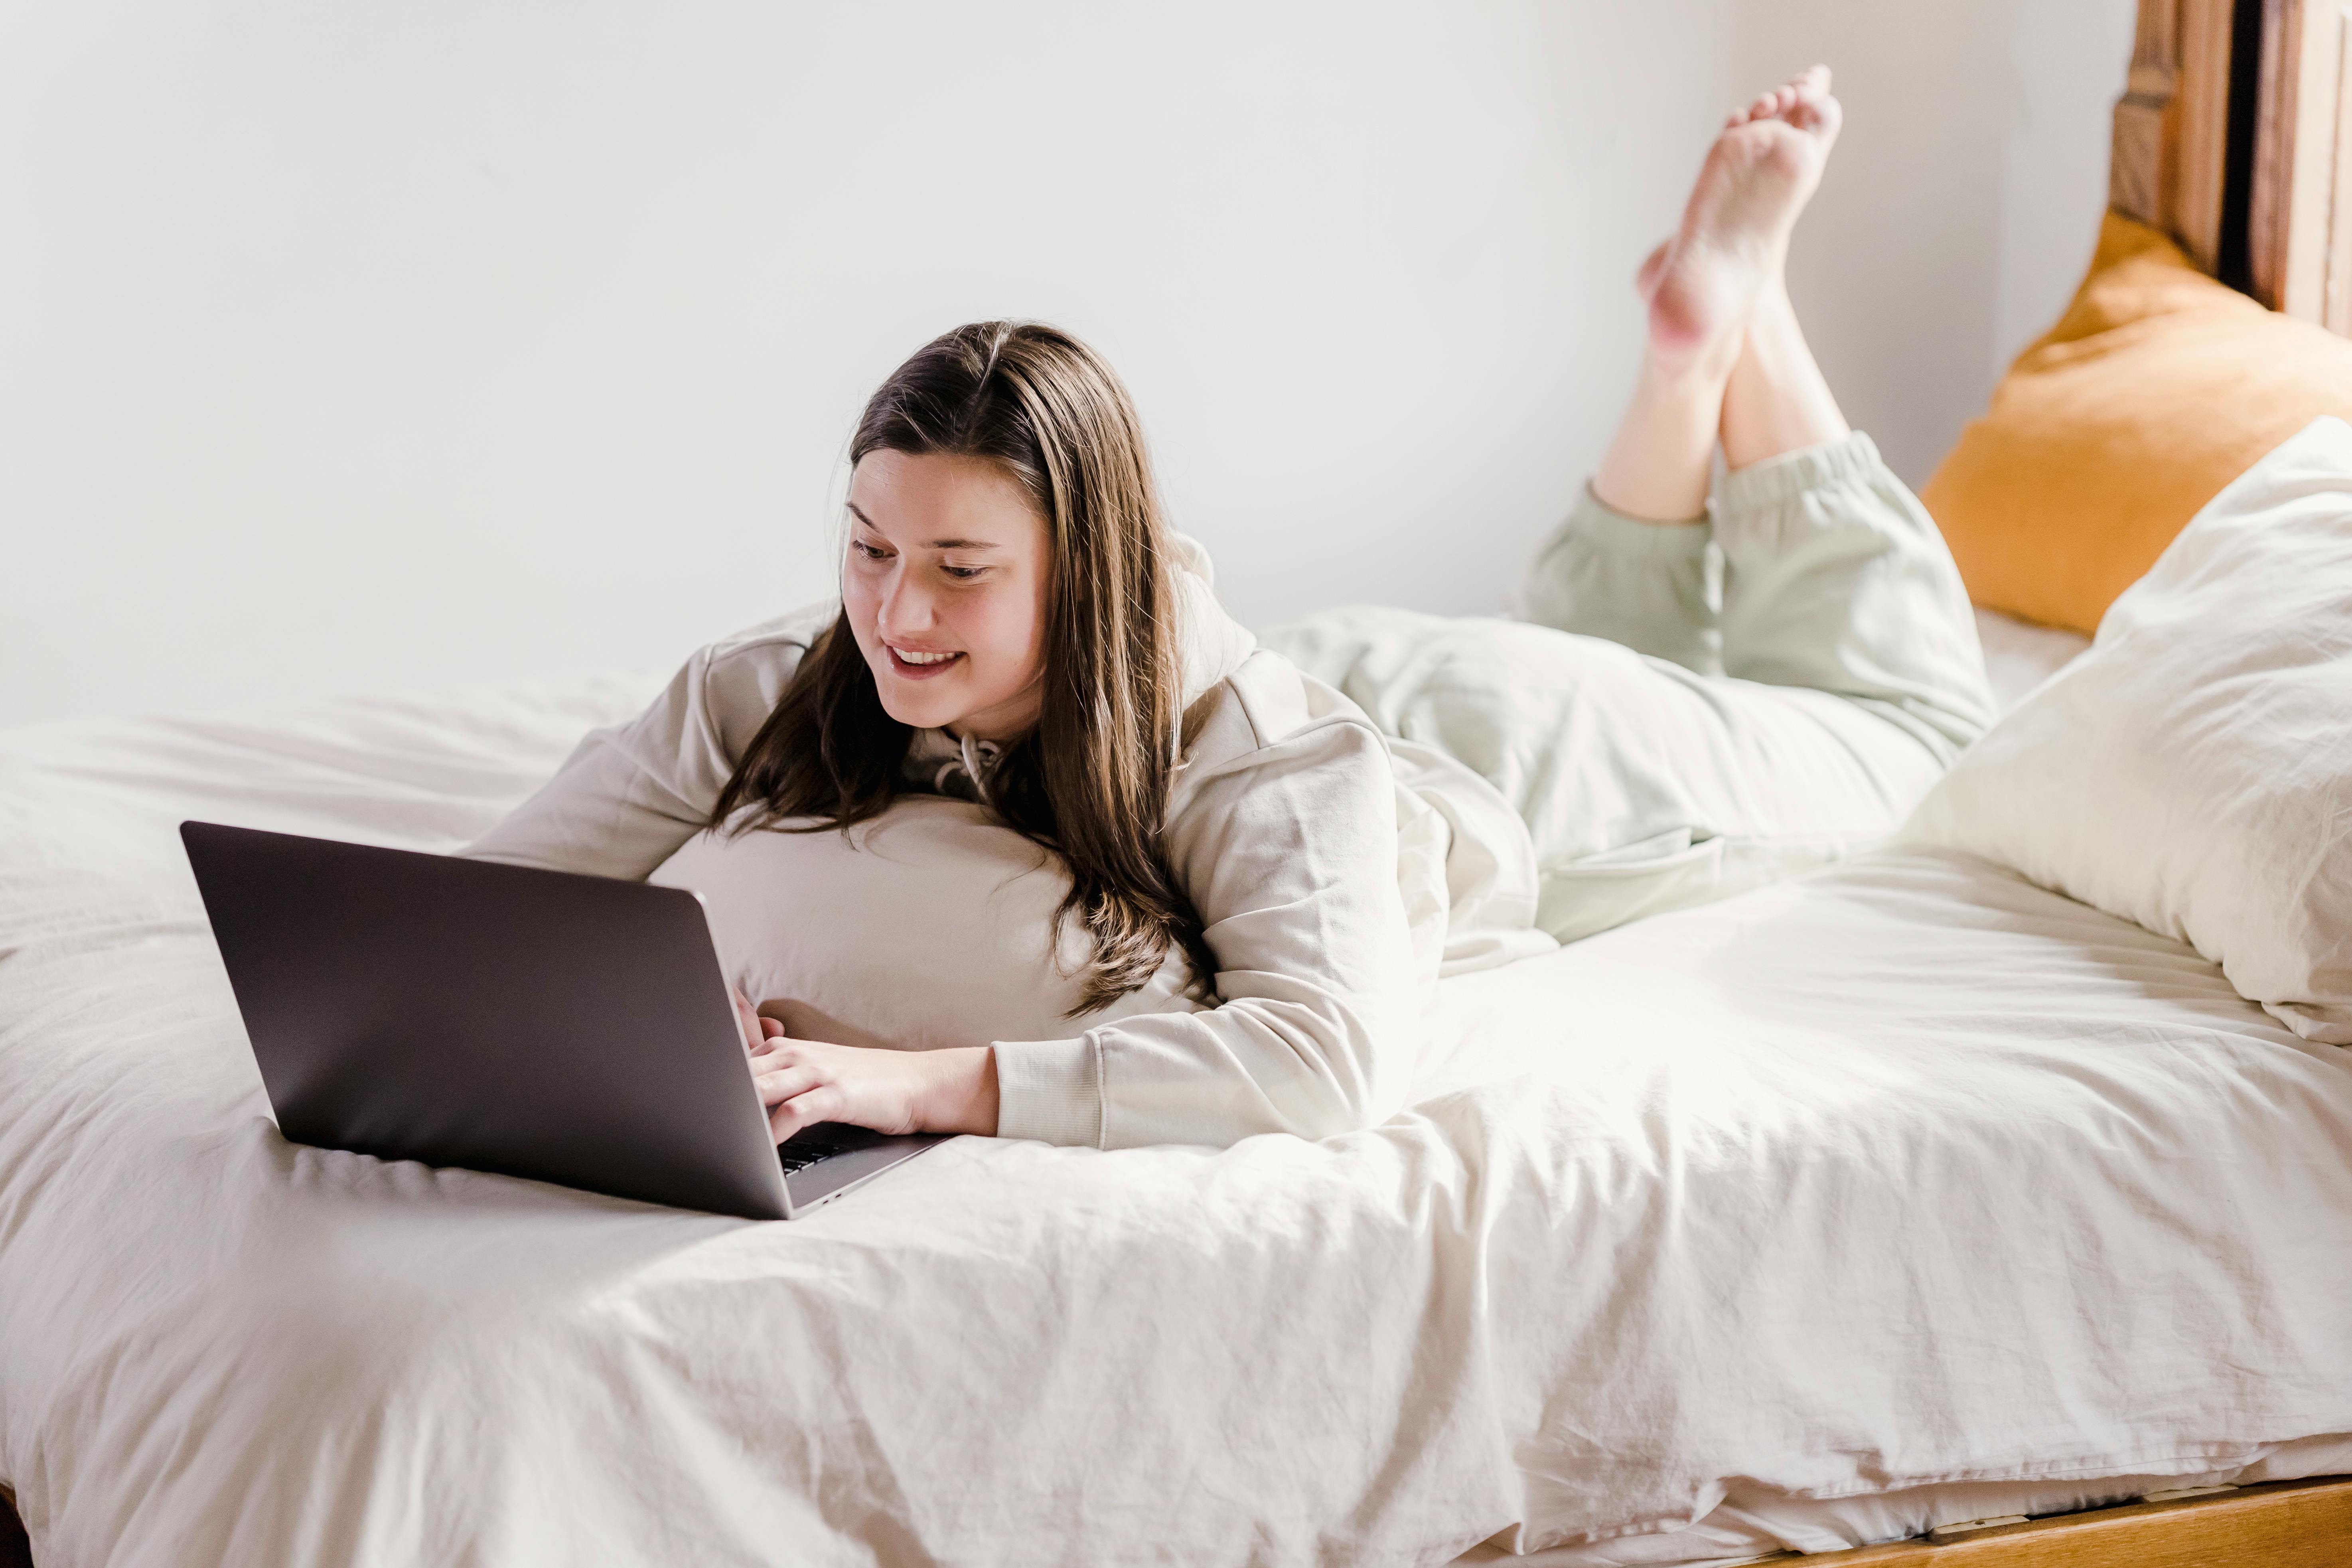 The Laptop And Computer In The Morning On A White Pillow Bed Lifestyle  Concept Stock Photo - Download Image Now - iStock